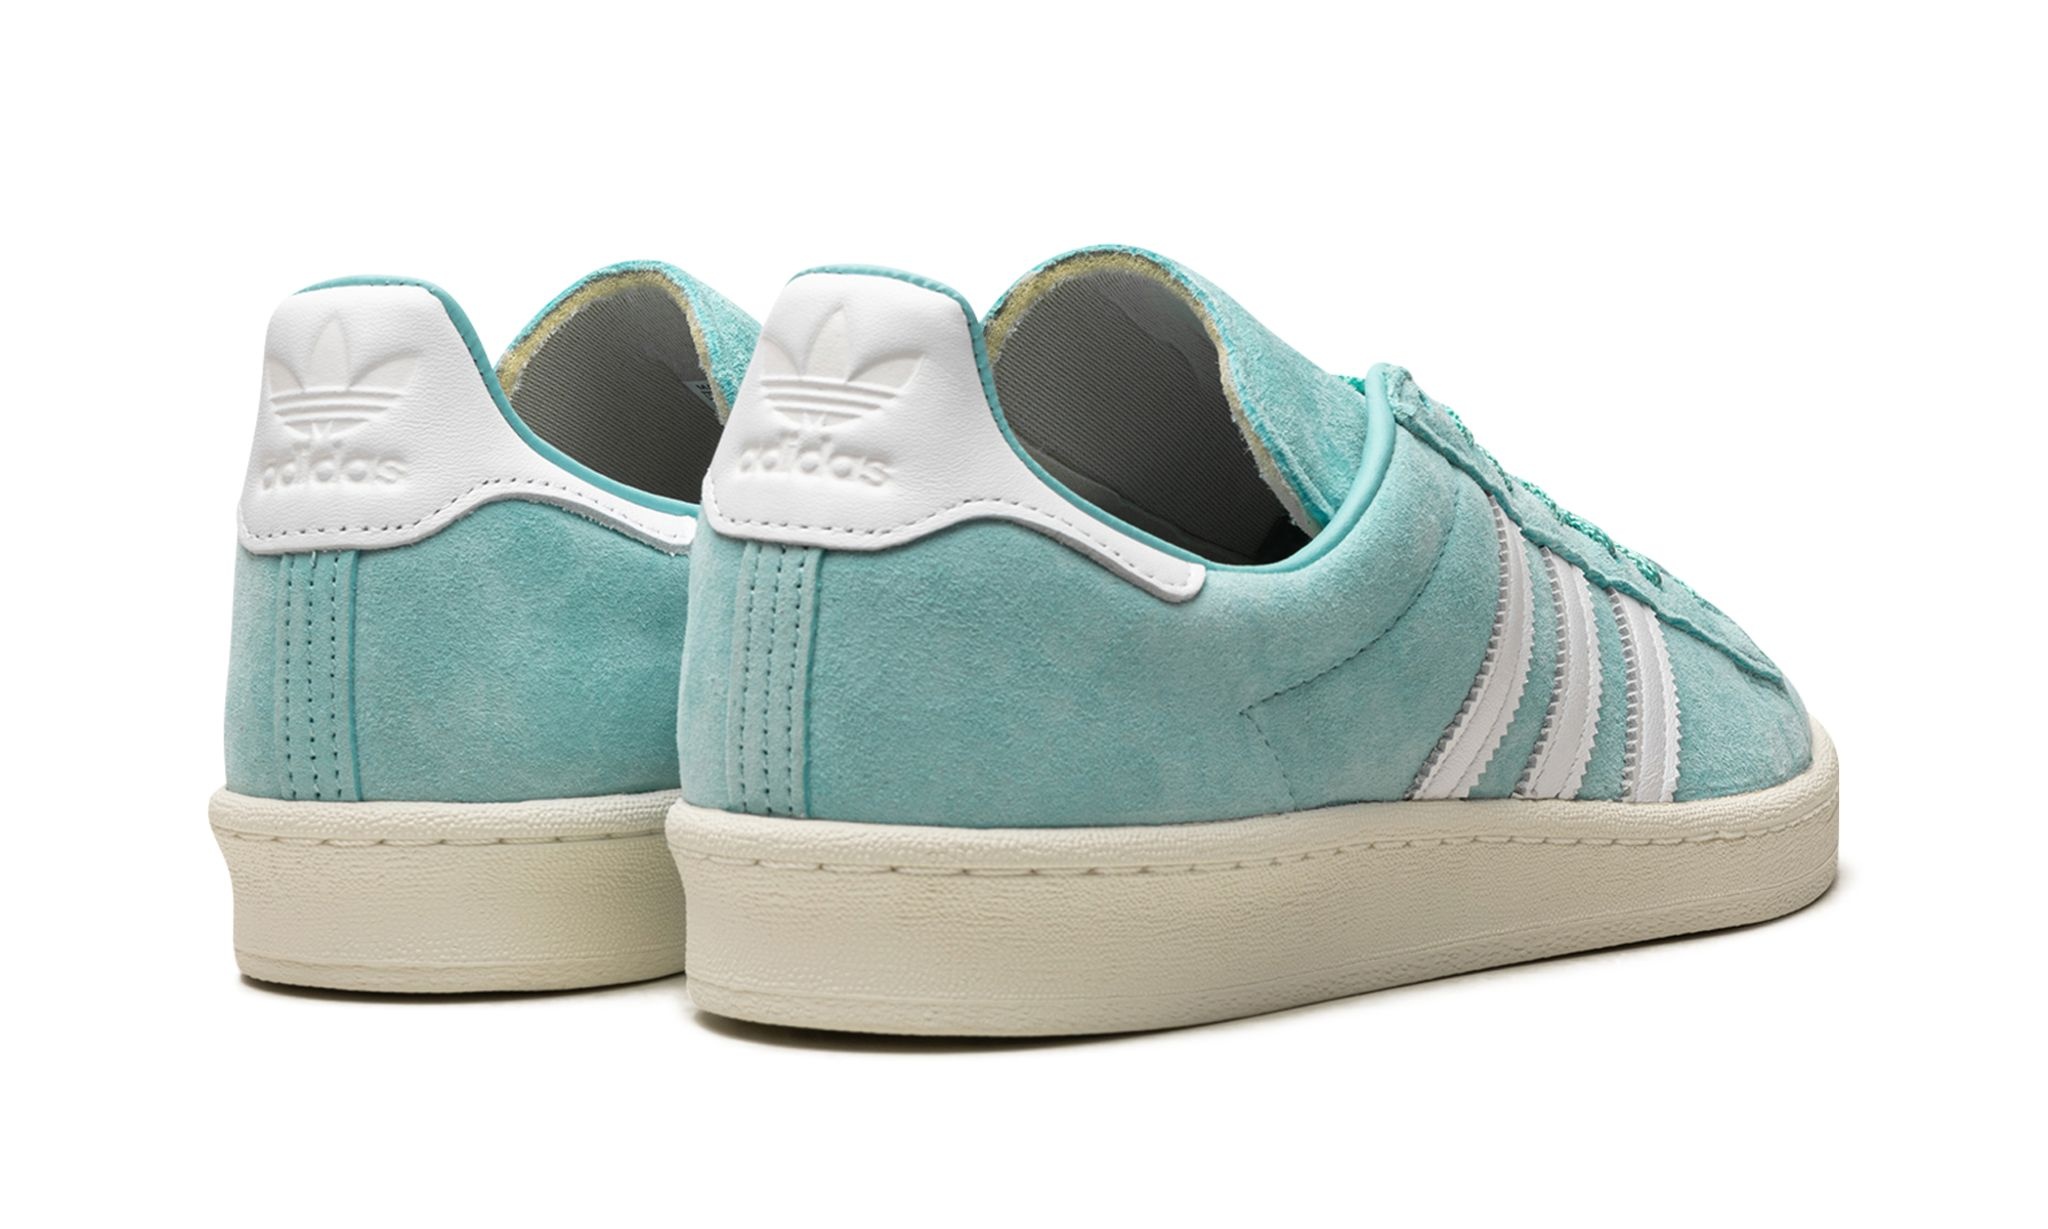 Campus 80s "Easy Mint" - 3